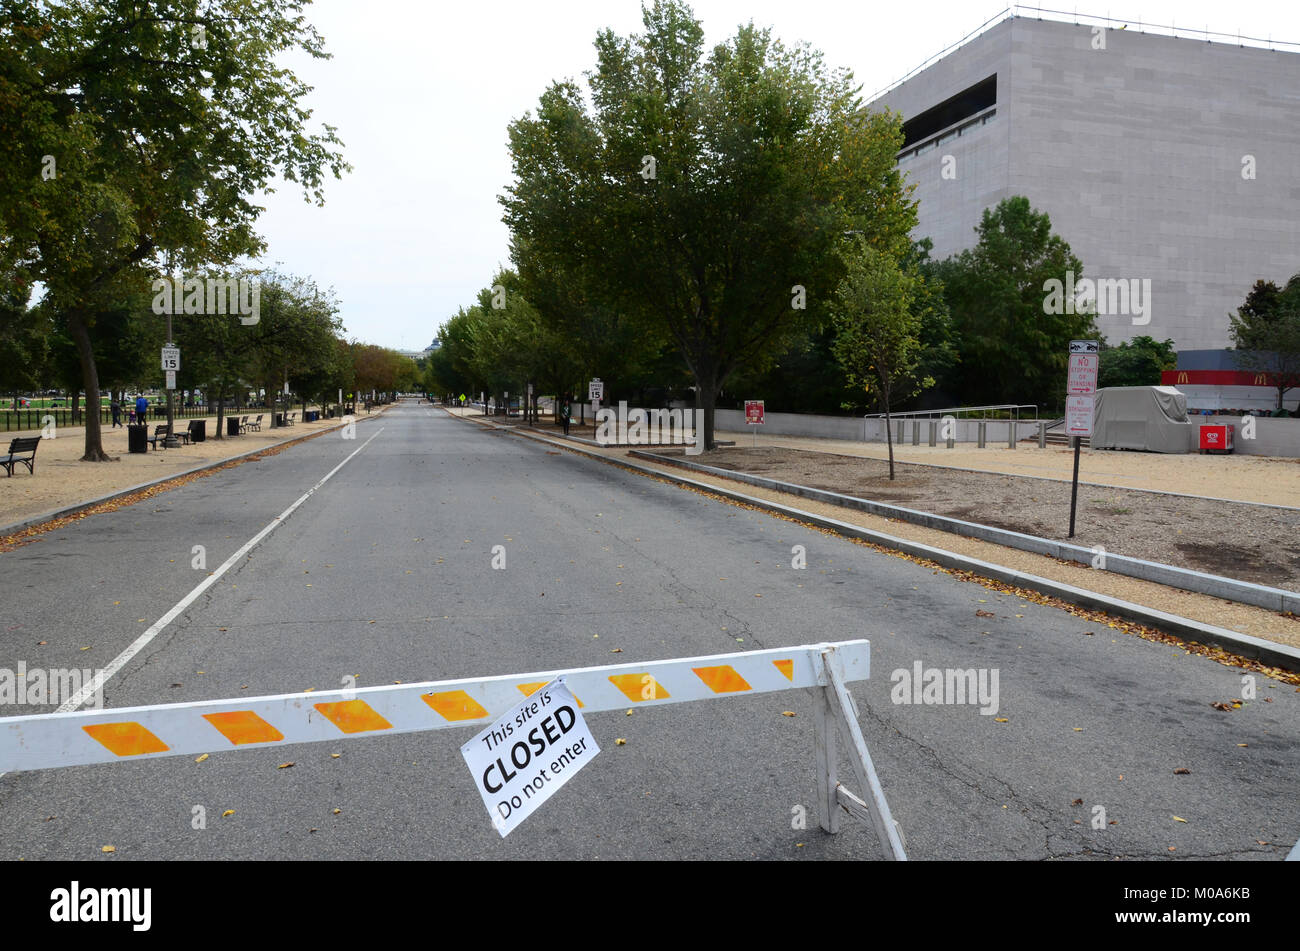 National monuments and museums in Washington DC were closed during the U.S. governemnt shutdown in 2013. Stock Photo